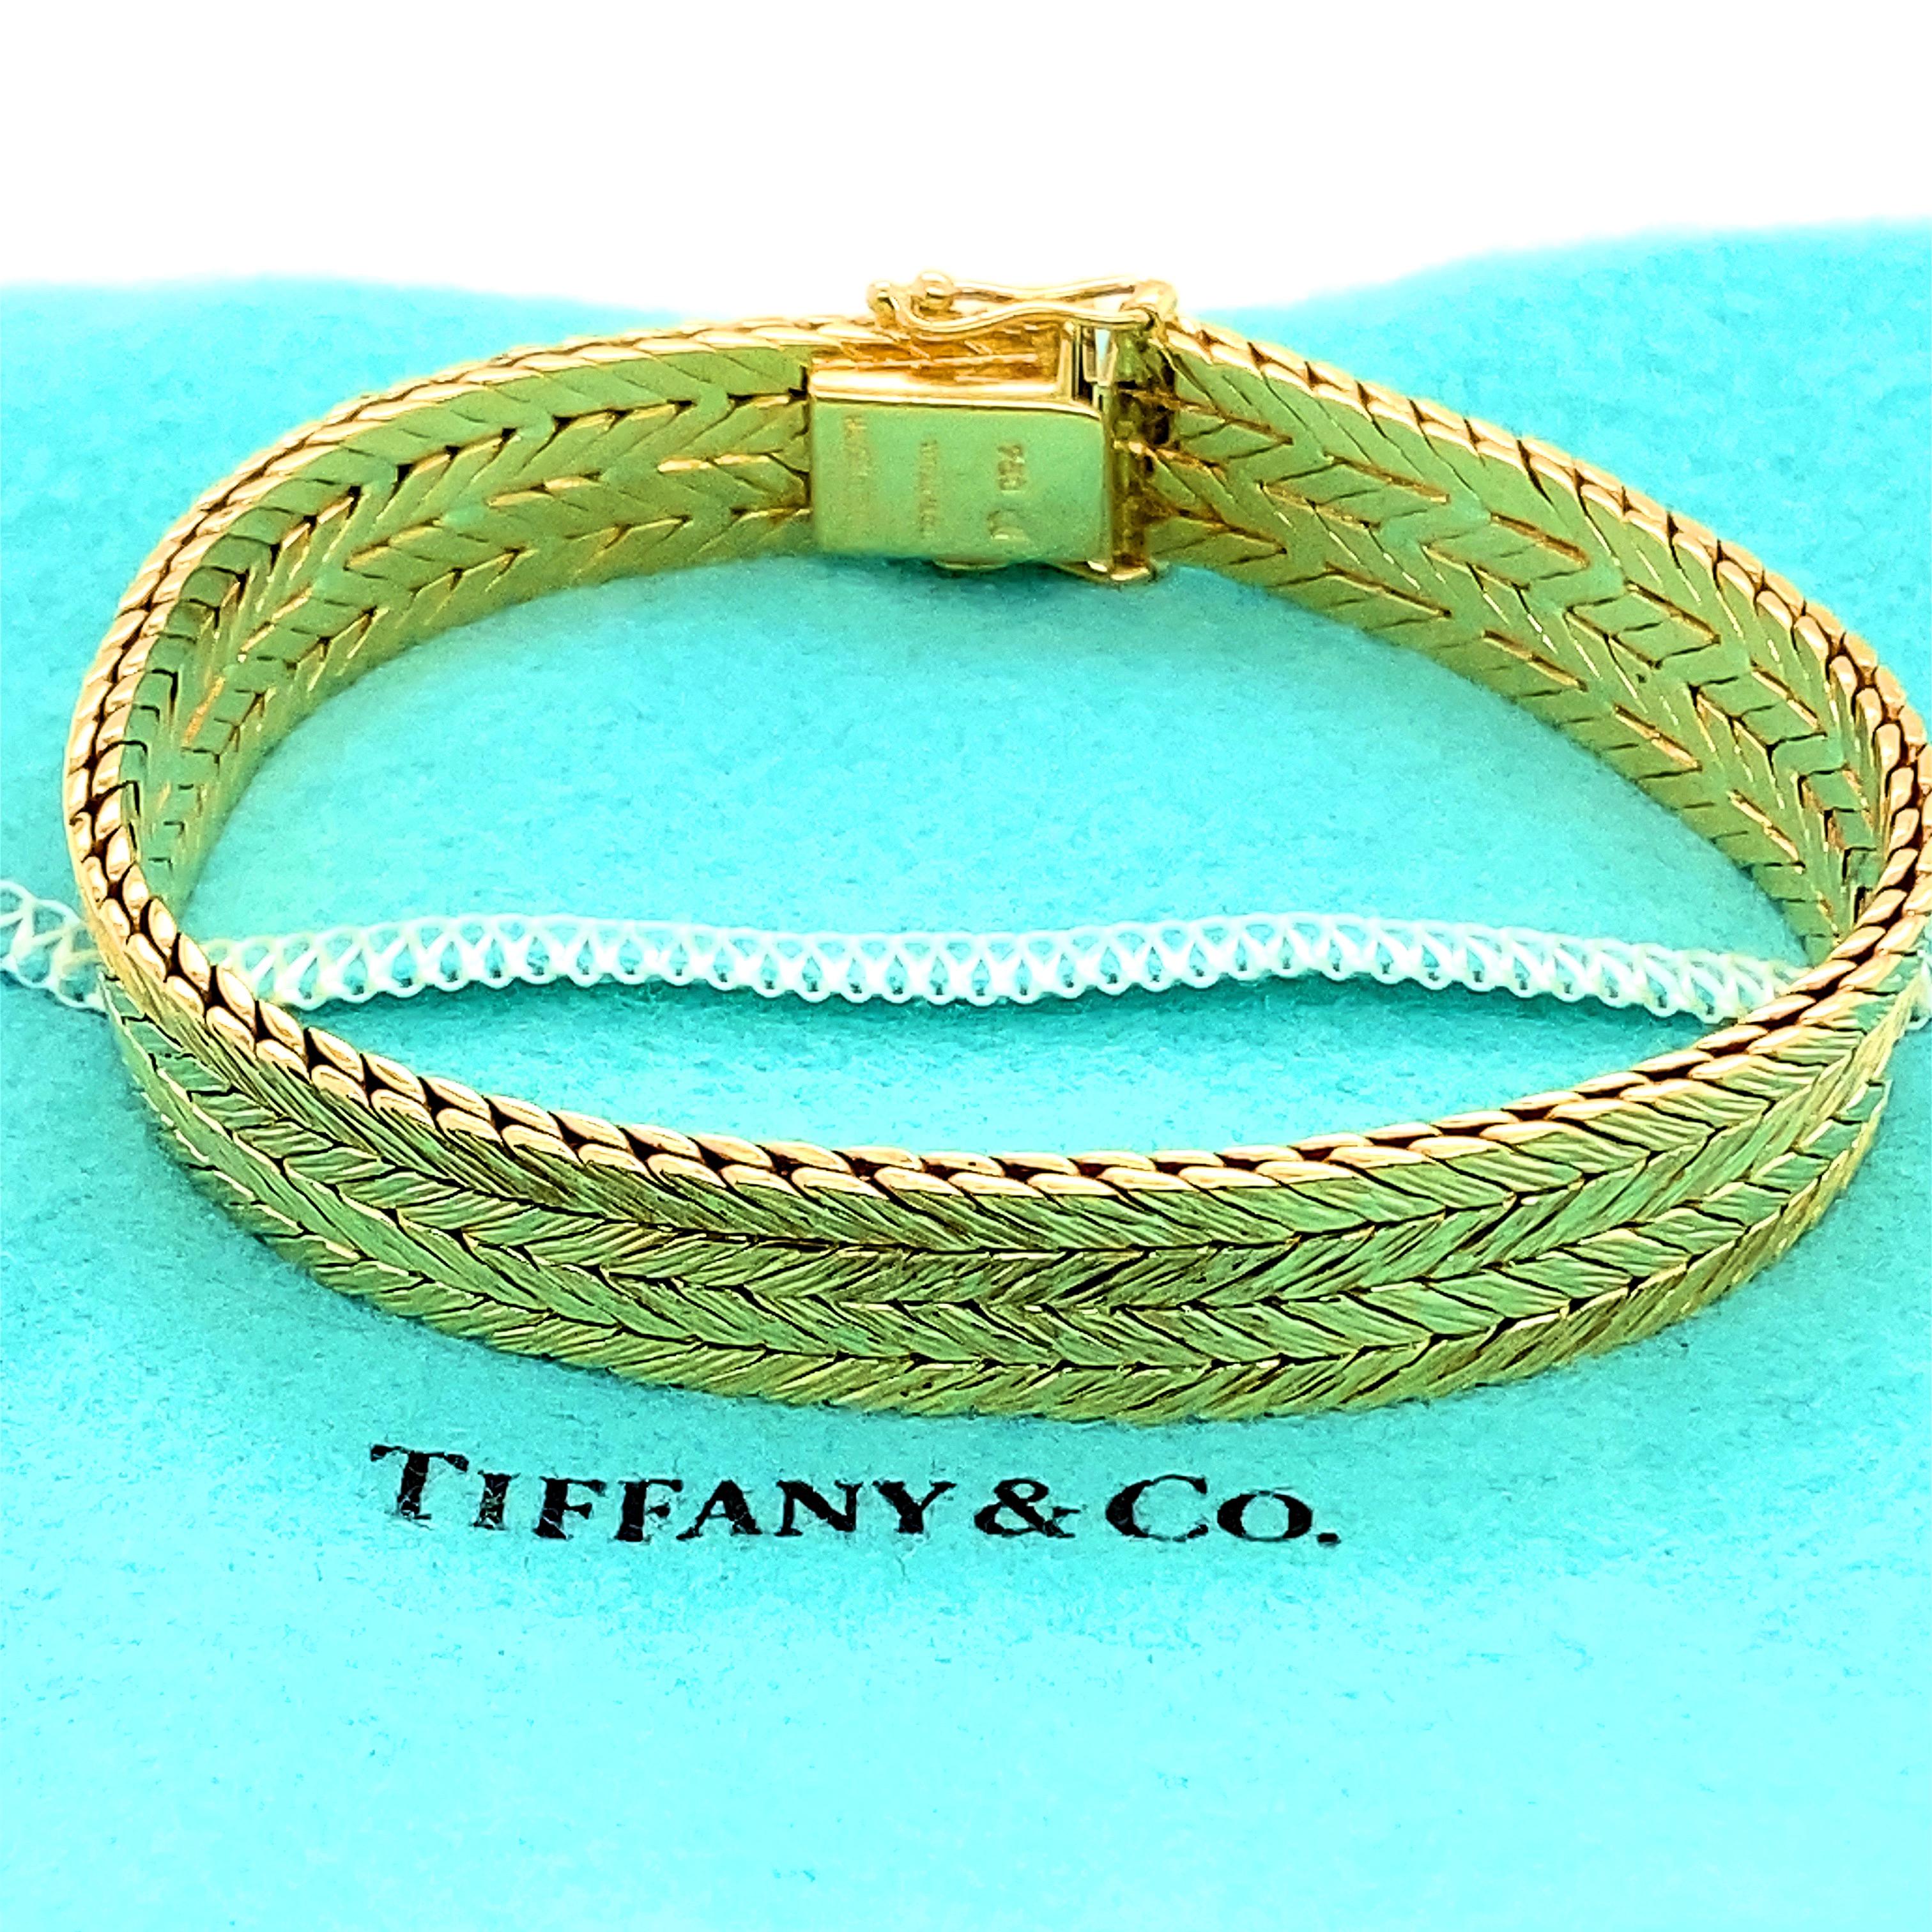 Tiffany & Co. Double Row Herringbone Woven Bracelet
Style:   Woven  
Metal:   18kt Yellow Gold
Made In:  West Germany Circa 1945 - 1990
Length:   7.5 inches
Width:  10 MM
Dept:  2.3 MM
Weight:  58.68 grams
Hallmark:   750 TIFFANY&CO MADE IN